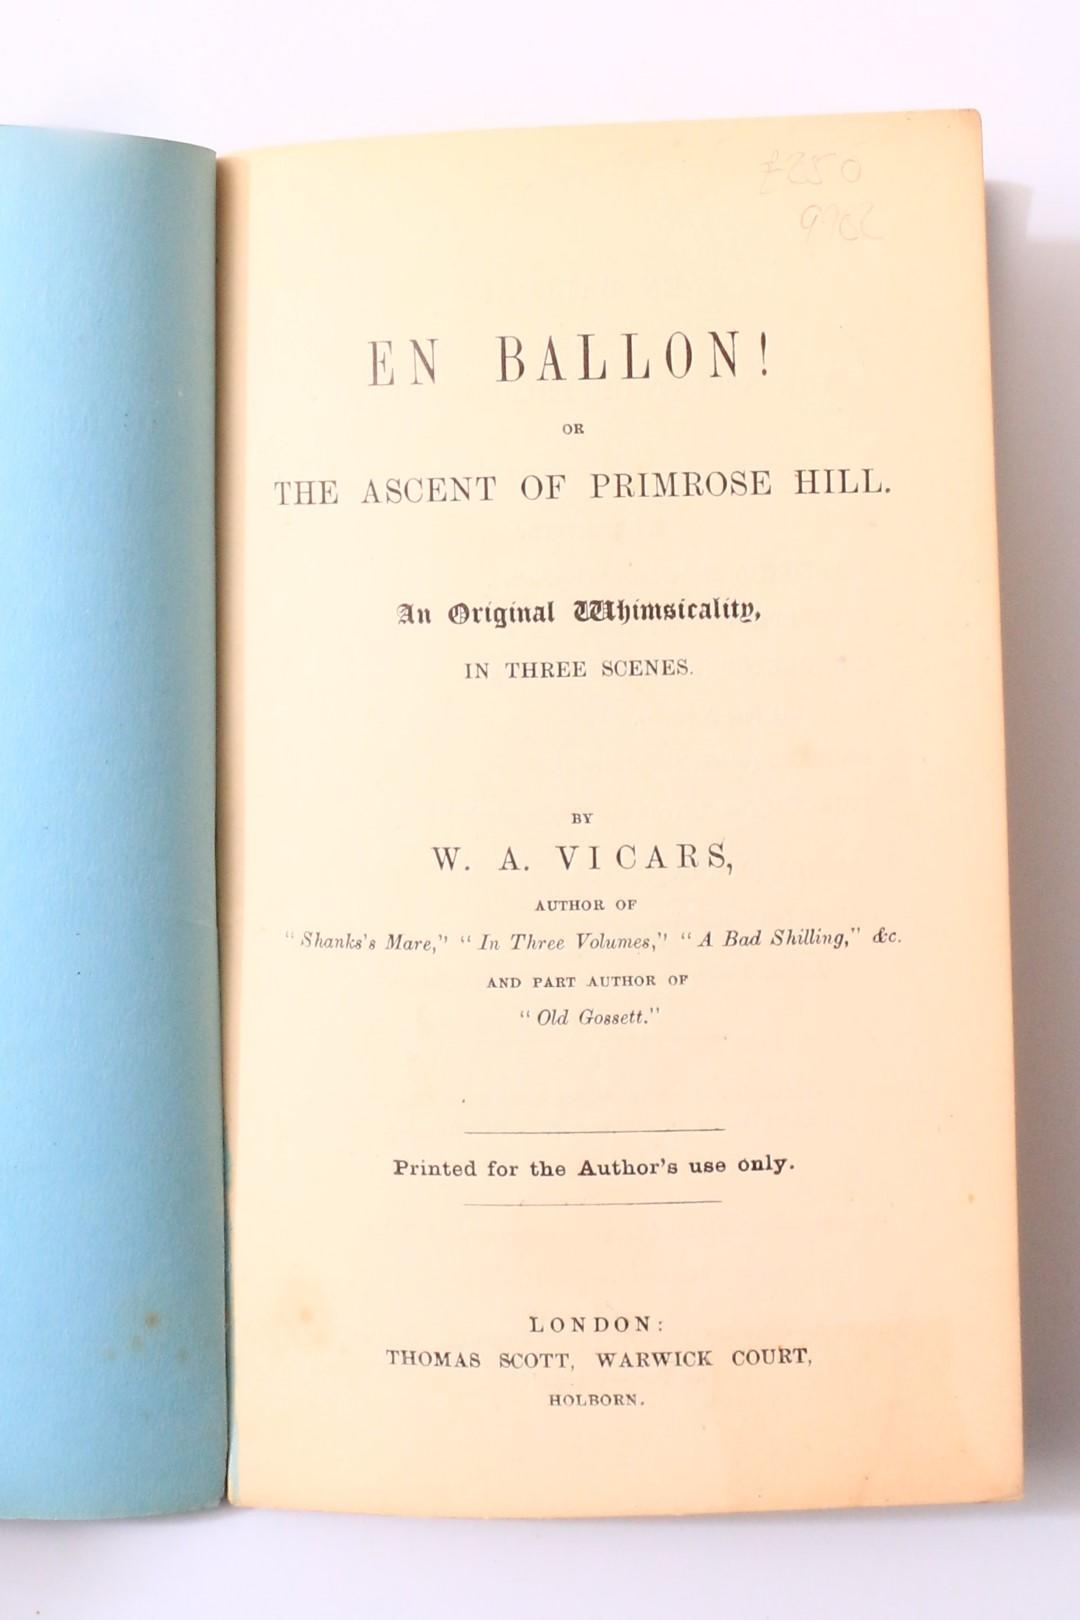 W.A. Vicars - En Ballon! Or The Ascent of Primrose Hill. An Original Whimsicality in Three Scenes - Thomas Scott, n.d. [1880s?], First Edition.